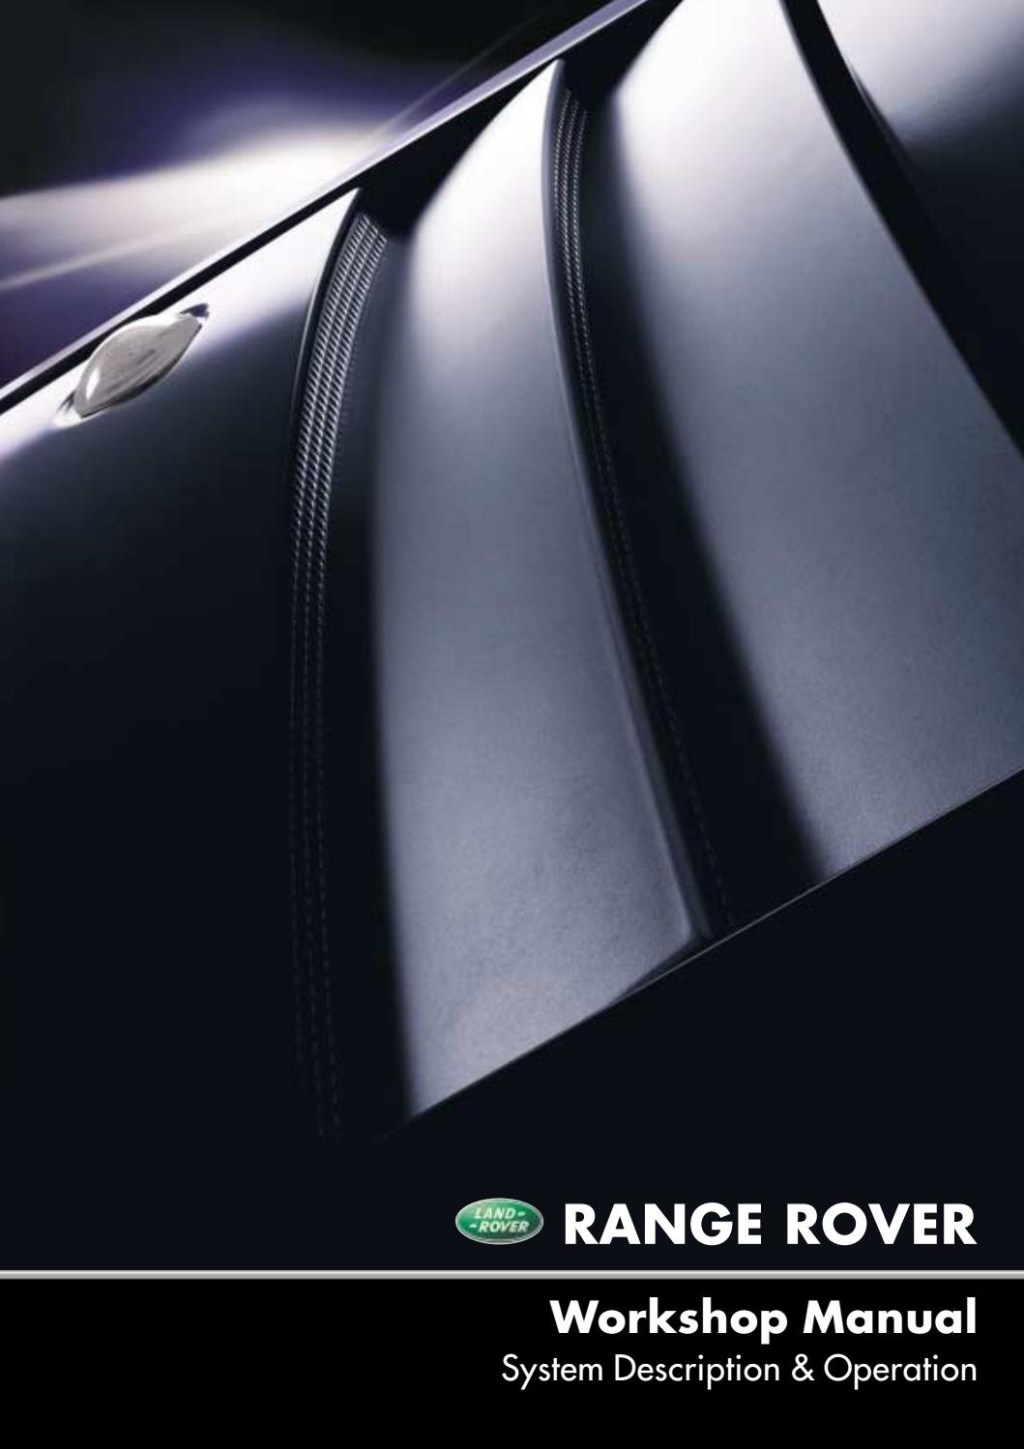 Picture of: Workshop manual l range rover part I by Fila Brasilero Colombia